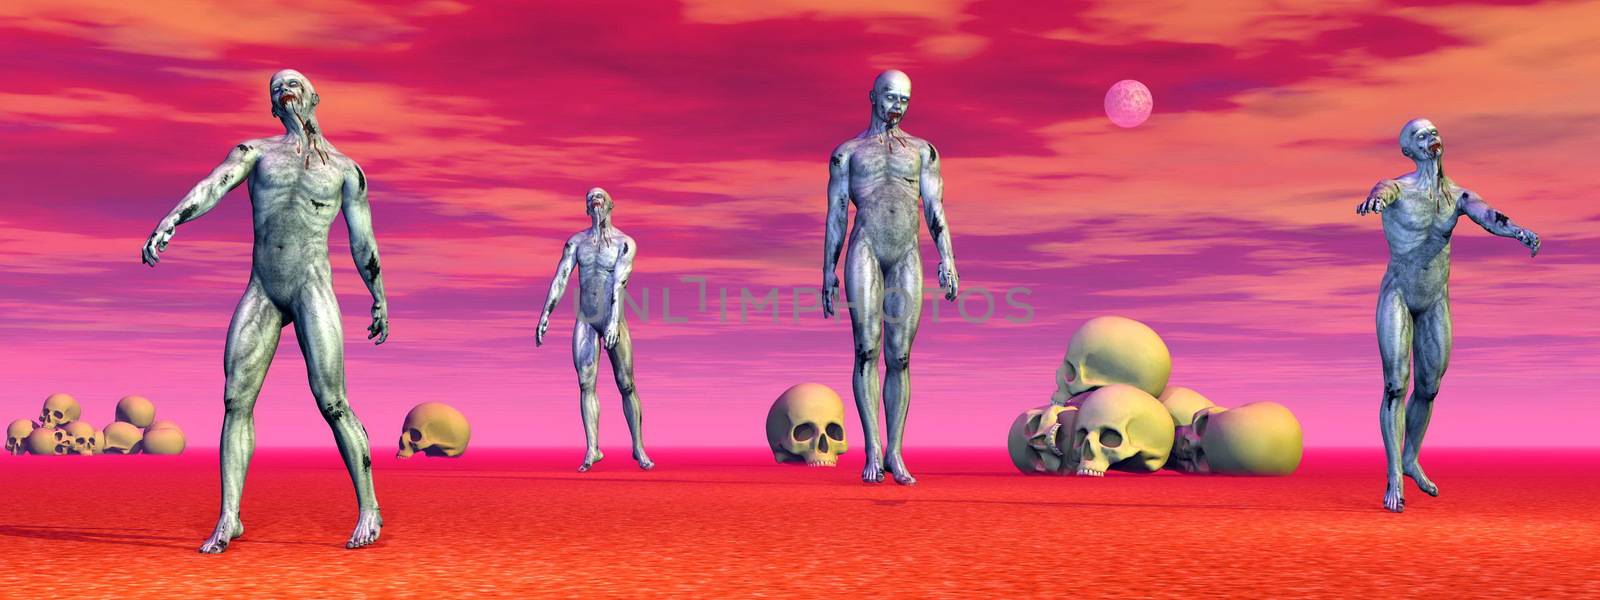 Zombies walking strangely among lots of skulls on the ground by colorful full moon night